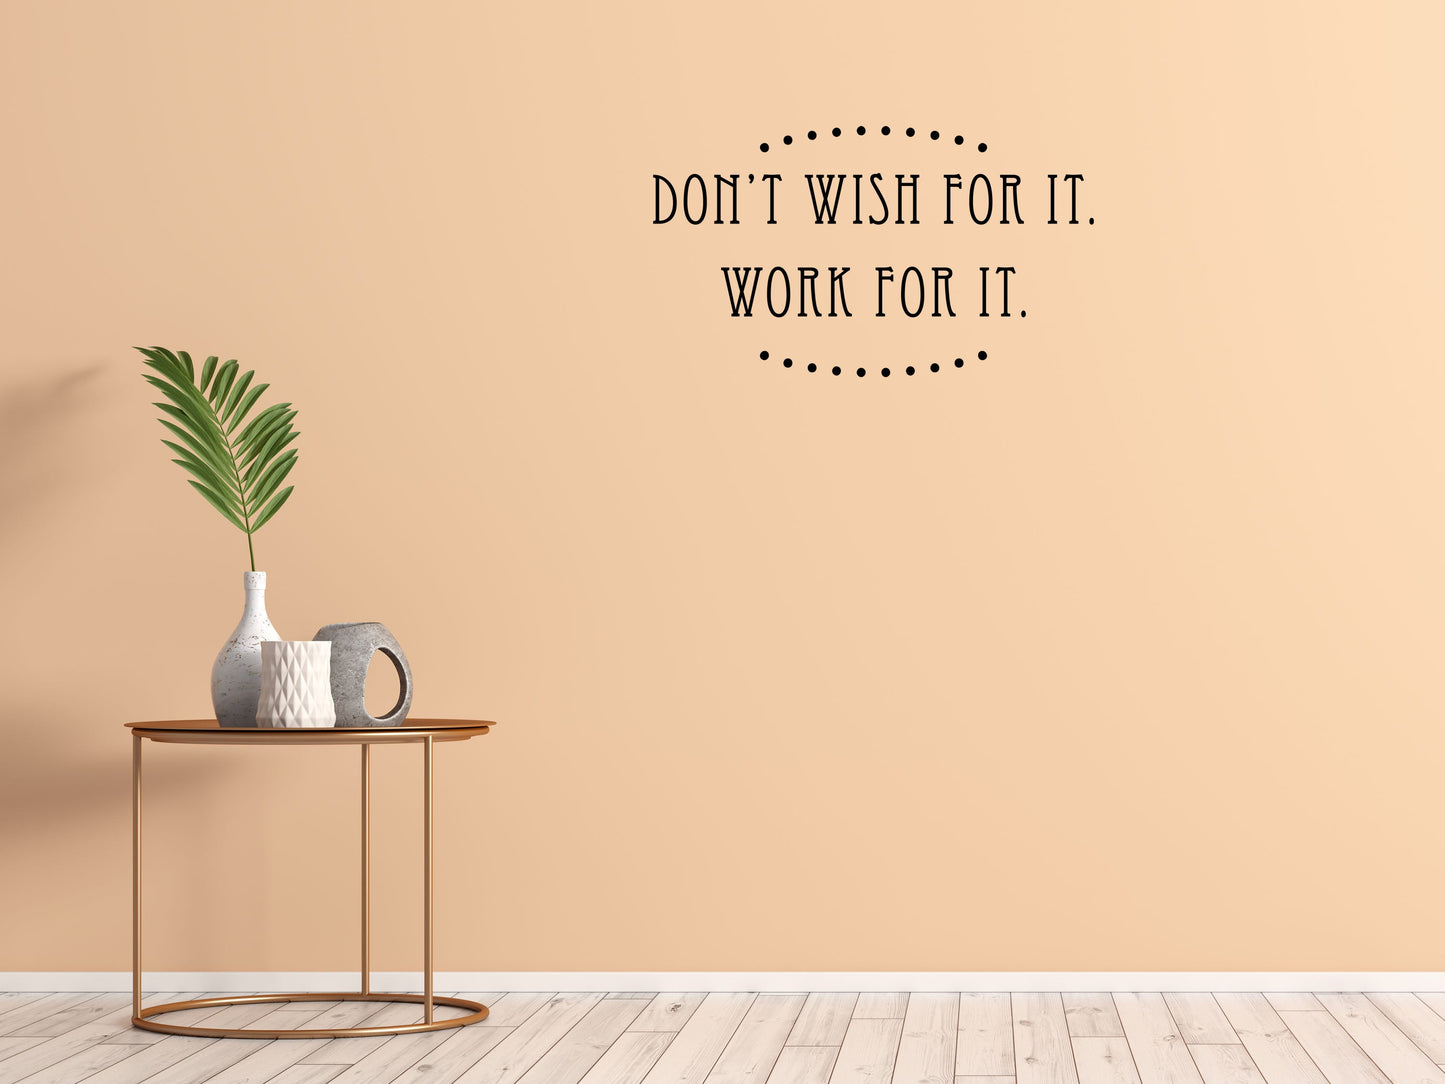 Don't Wish For It Work For It Motivational Sticker - Inspirational Wall Decals Vinyl Wall Decal Inspirational Wall Signs 